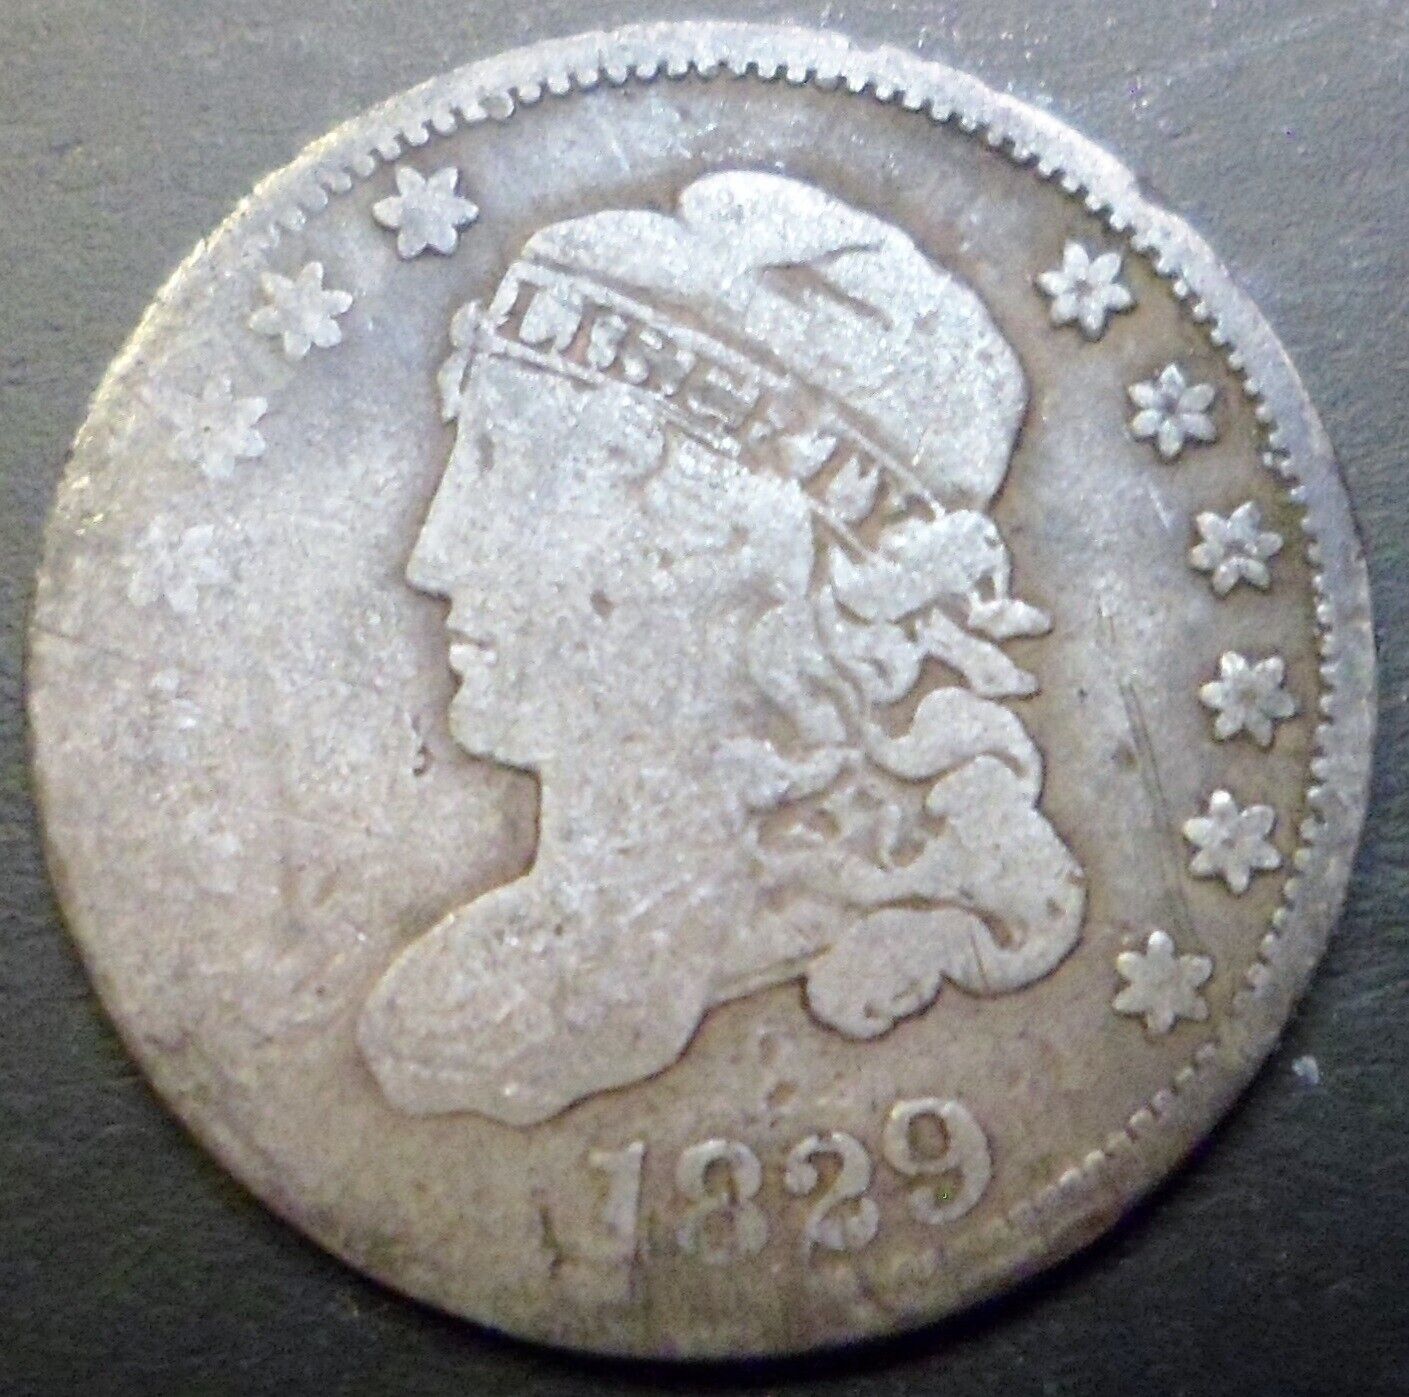 Full Liberty 1829 Capped Bust Half Dime 5c Scarce Estate Collection Silver J216